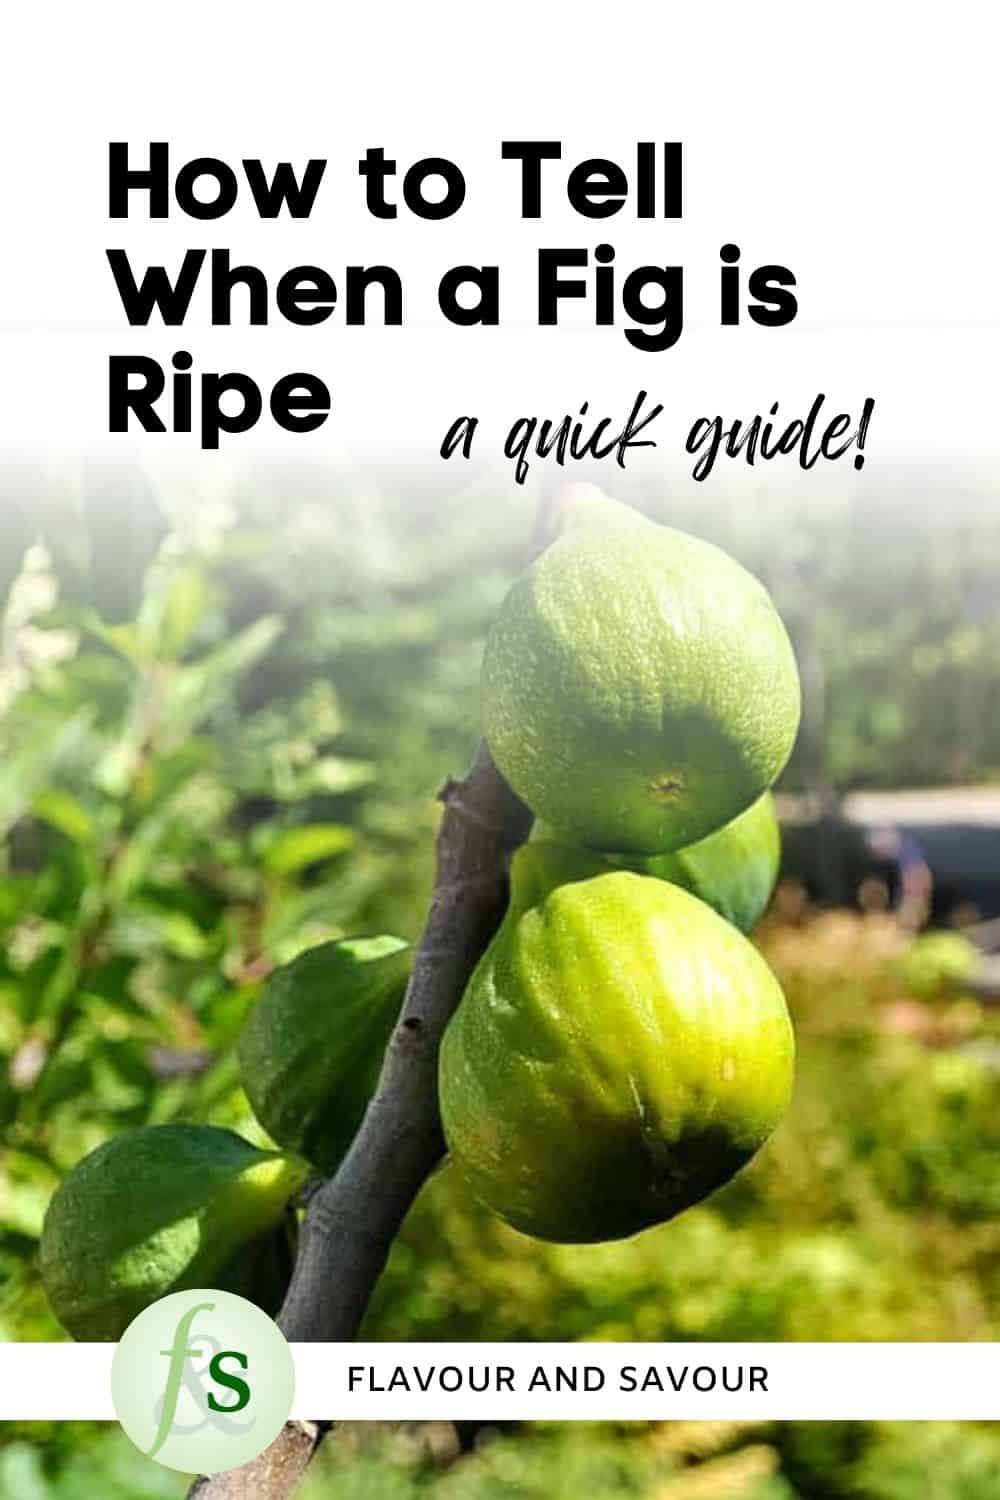 Image with text overlay for How to Tell when a Fig is Ripe.